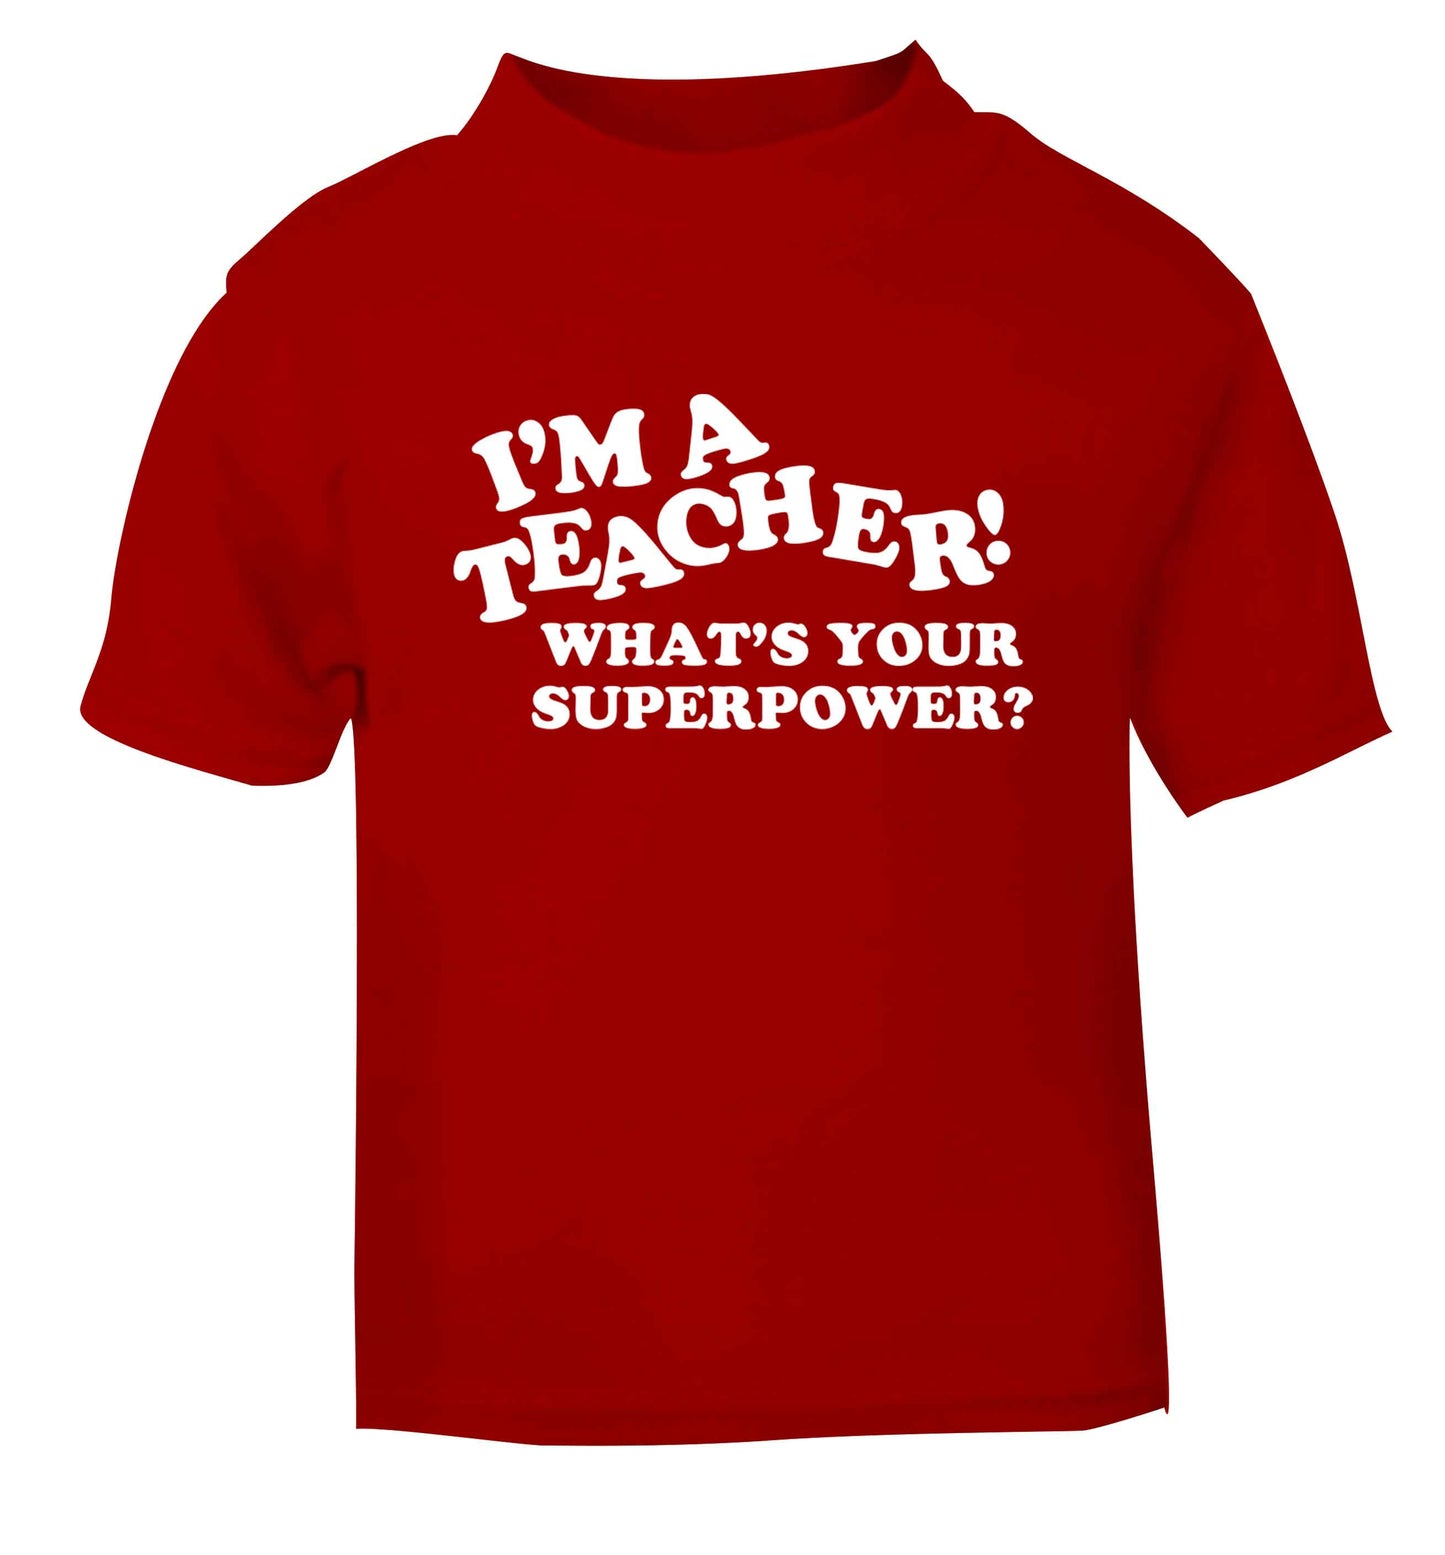 I'm a teacher what's your superpower?! red baby toddler Tshirt 2 Years